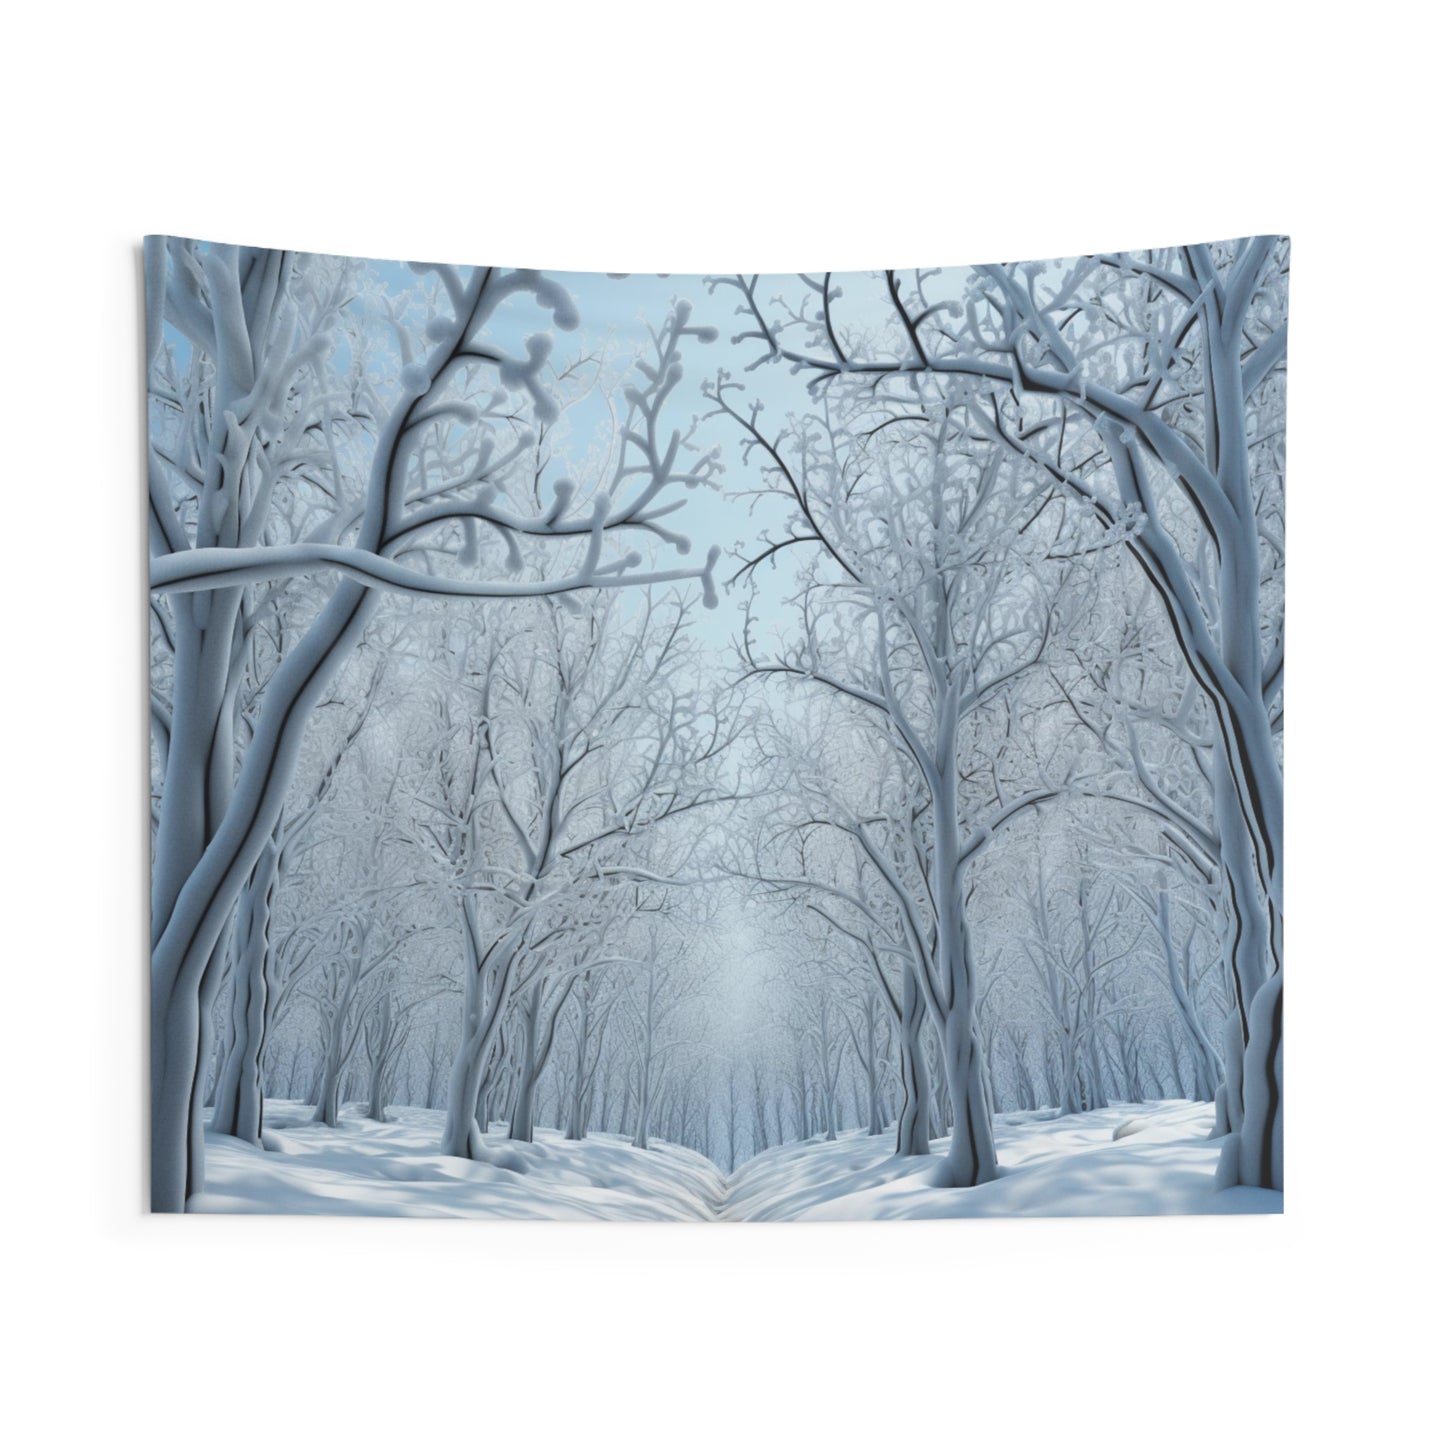 Winter Snow Forest Tapestry, Woods Wall Art Hanging Cool Unique Landscape Aesthetic Large Small Decor Bedroom College Dorm Room Starcove Fashion